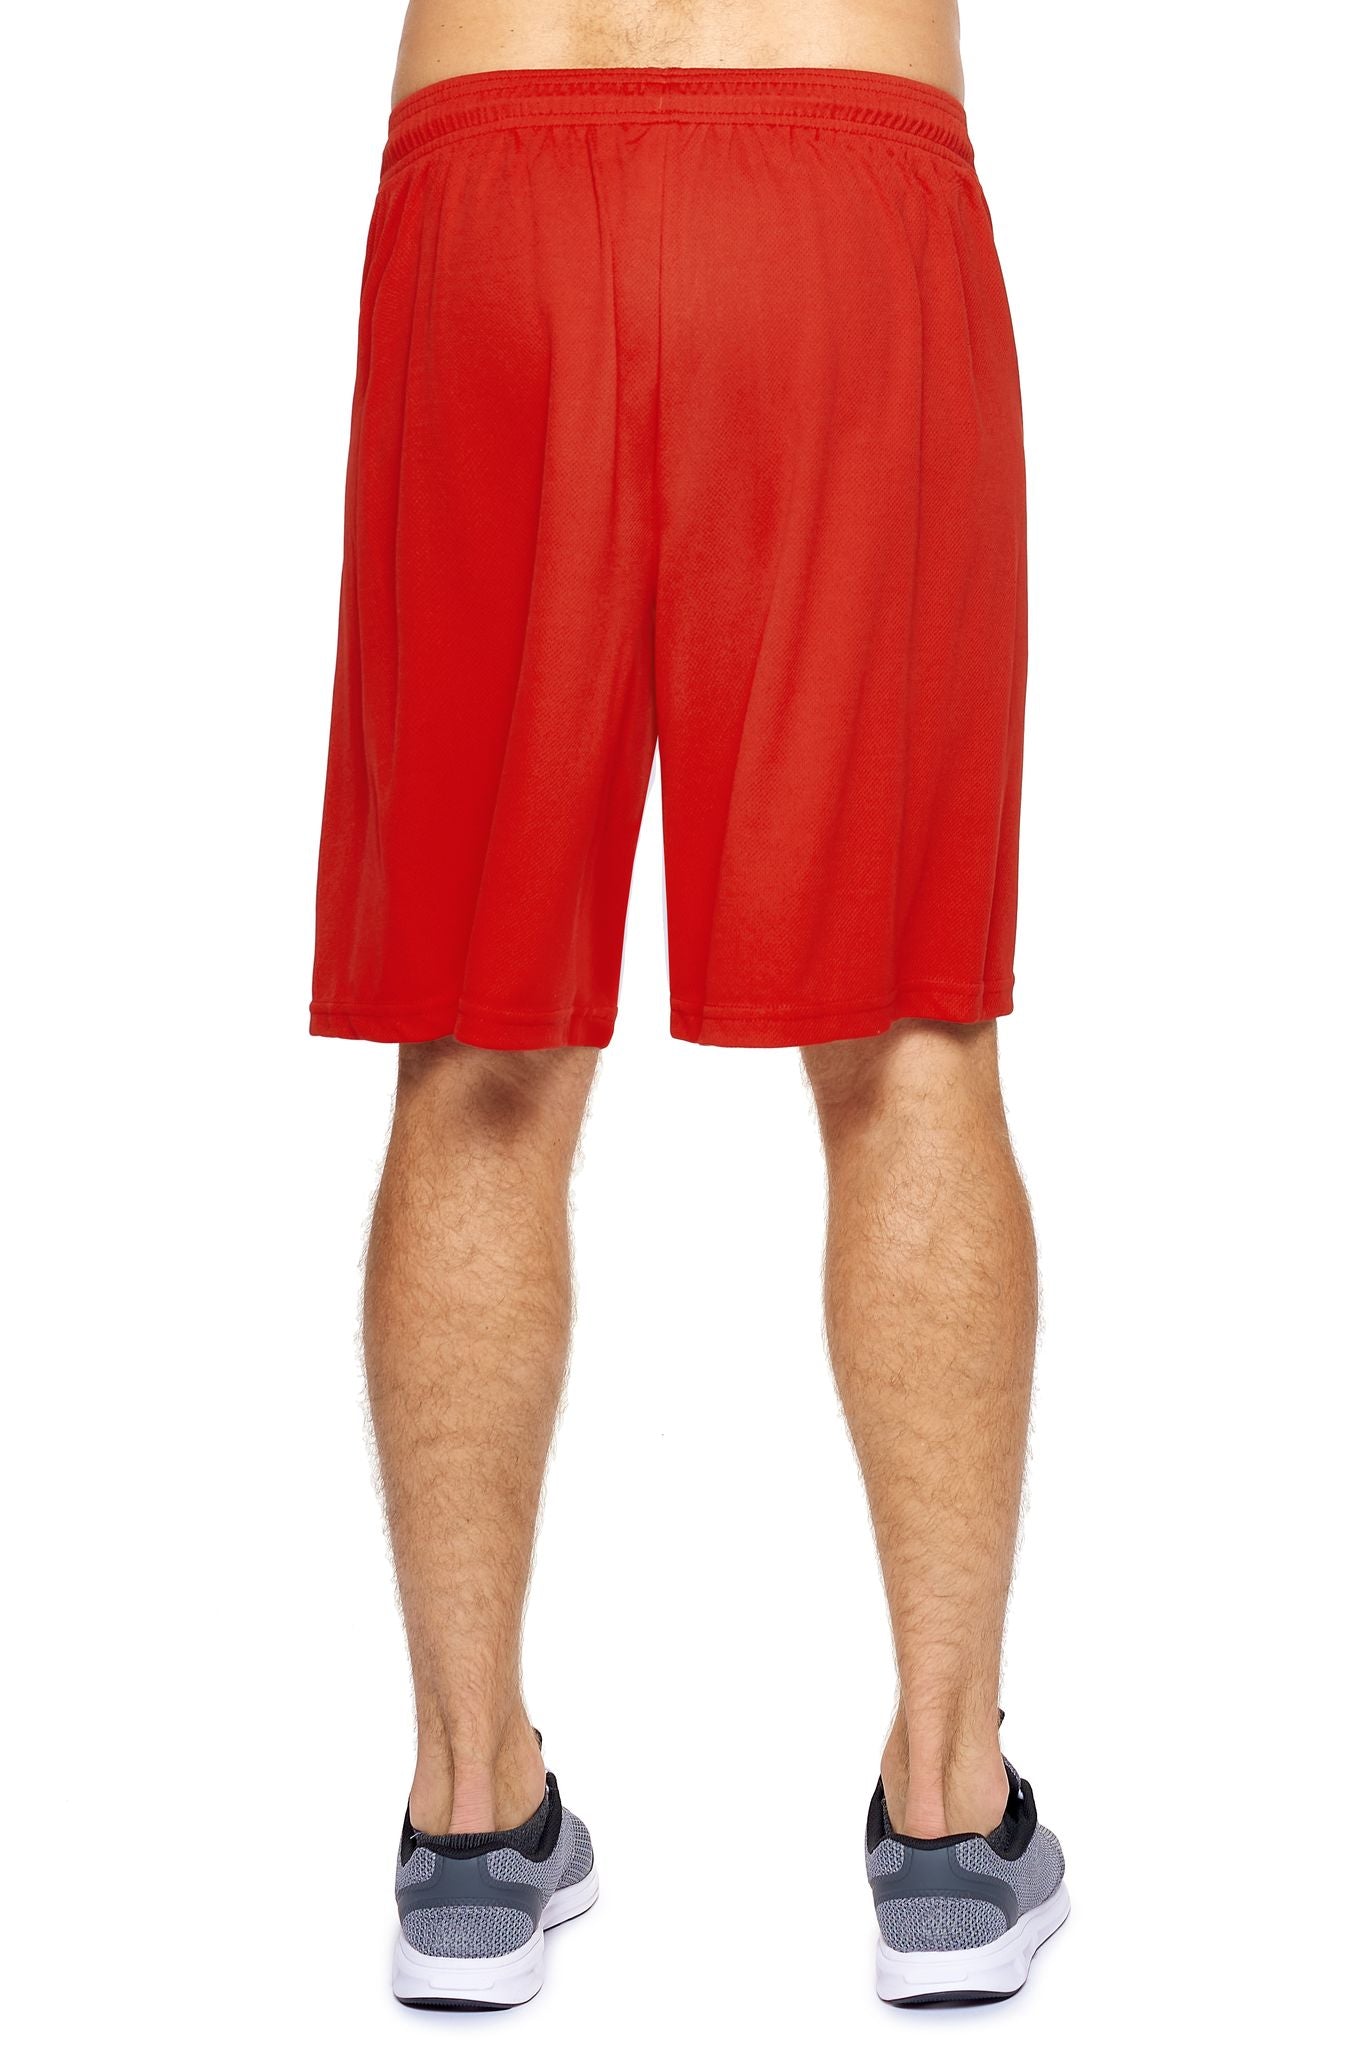 Expert Brand Men's Oxymesh™ Training Shorts in True Red Image 3#red